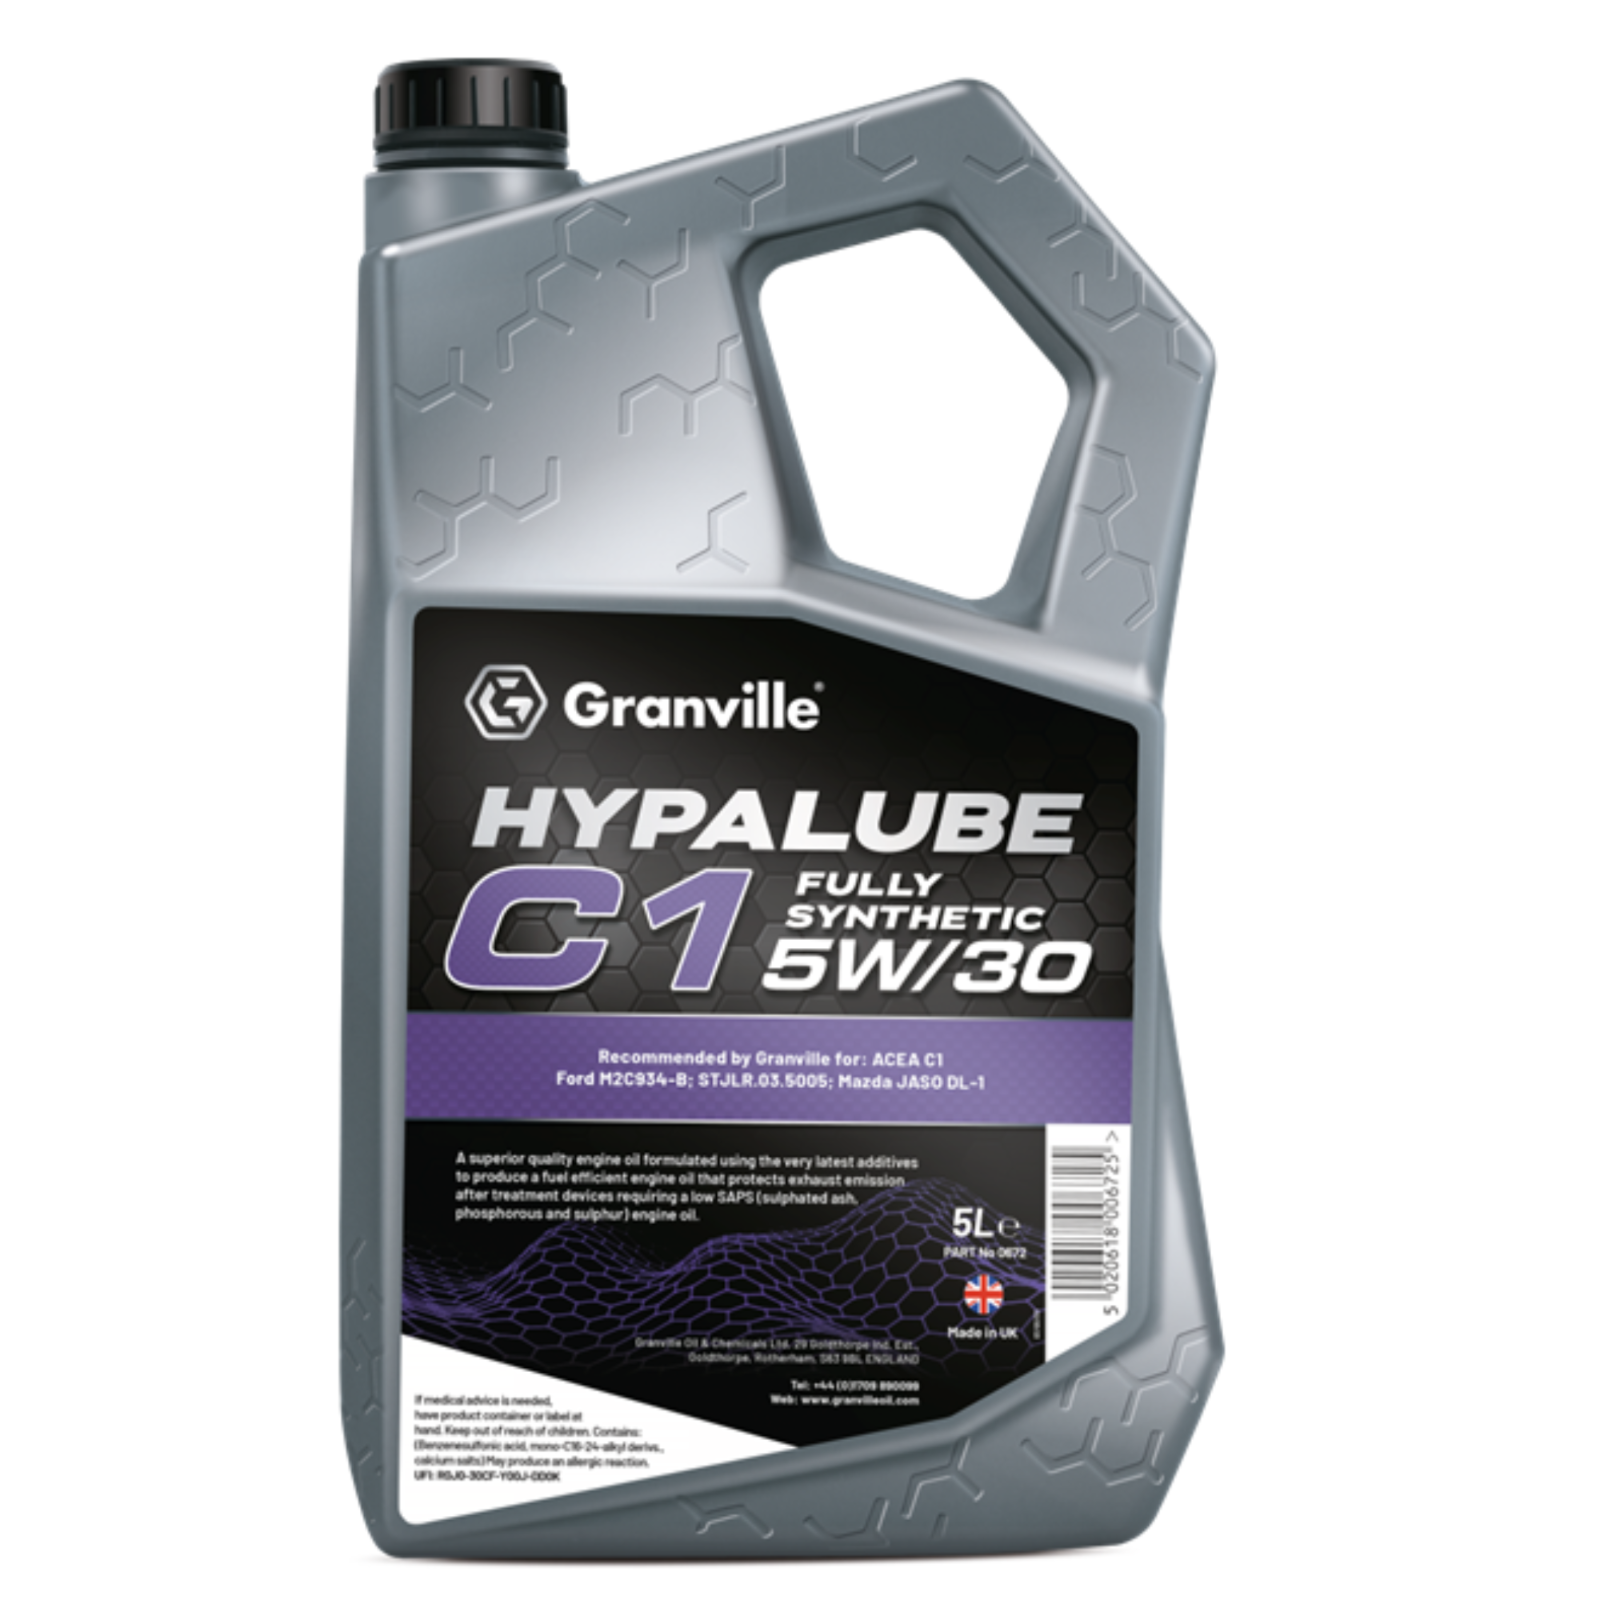 Granville Hypalube C1 Fully Synthetic 5W/30 5 Litres